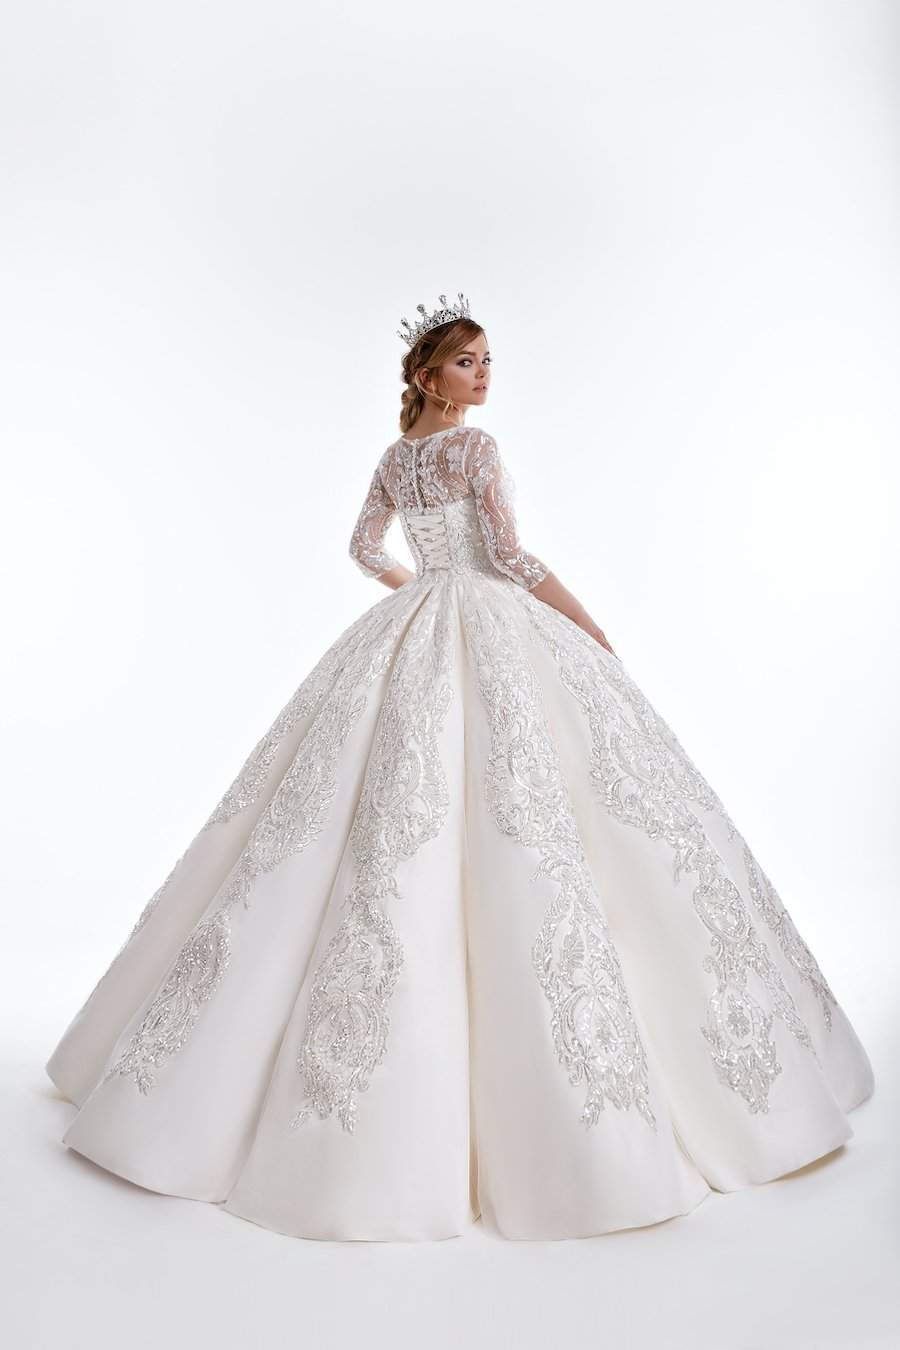 White Ball Gown Wedding Dress-Ball Gown,Classic Elegant Gowns,Royal Wedding Dresses,White